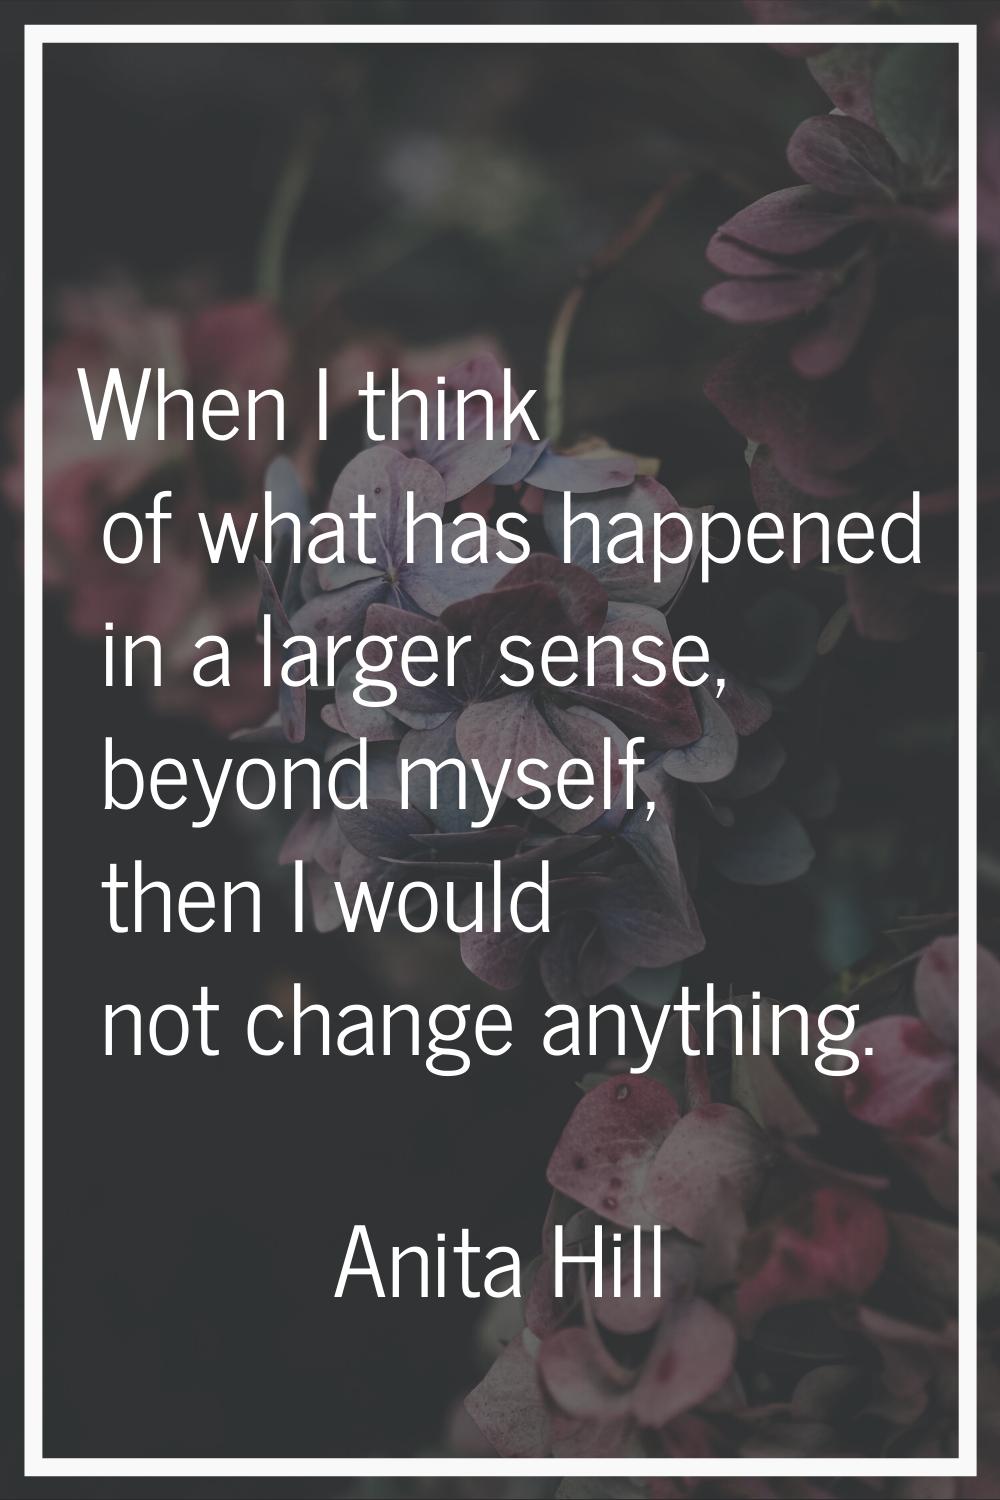 When I think of what has happened in a larger sense, beyond myself, then I would not change anythin